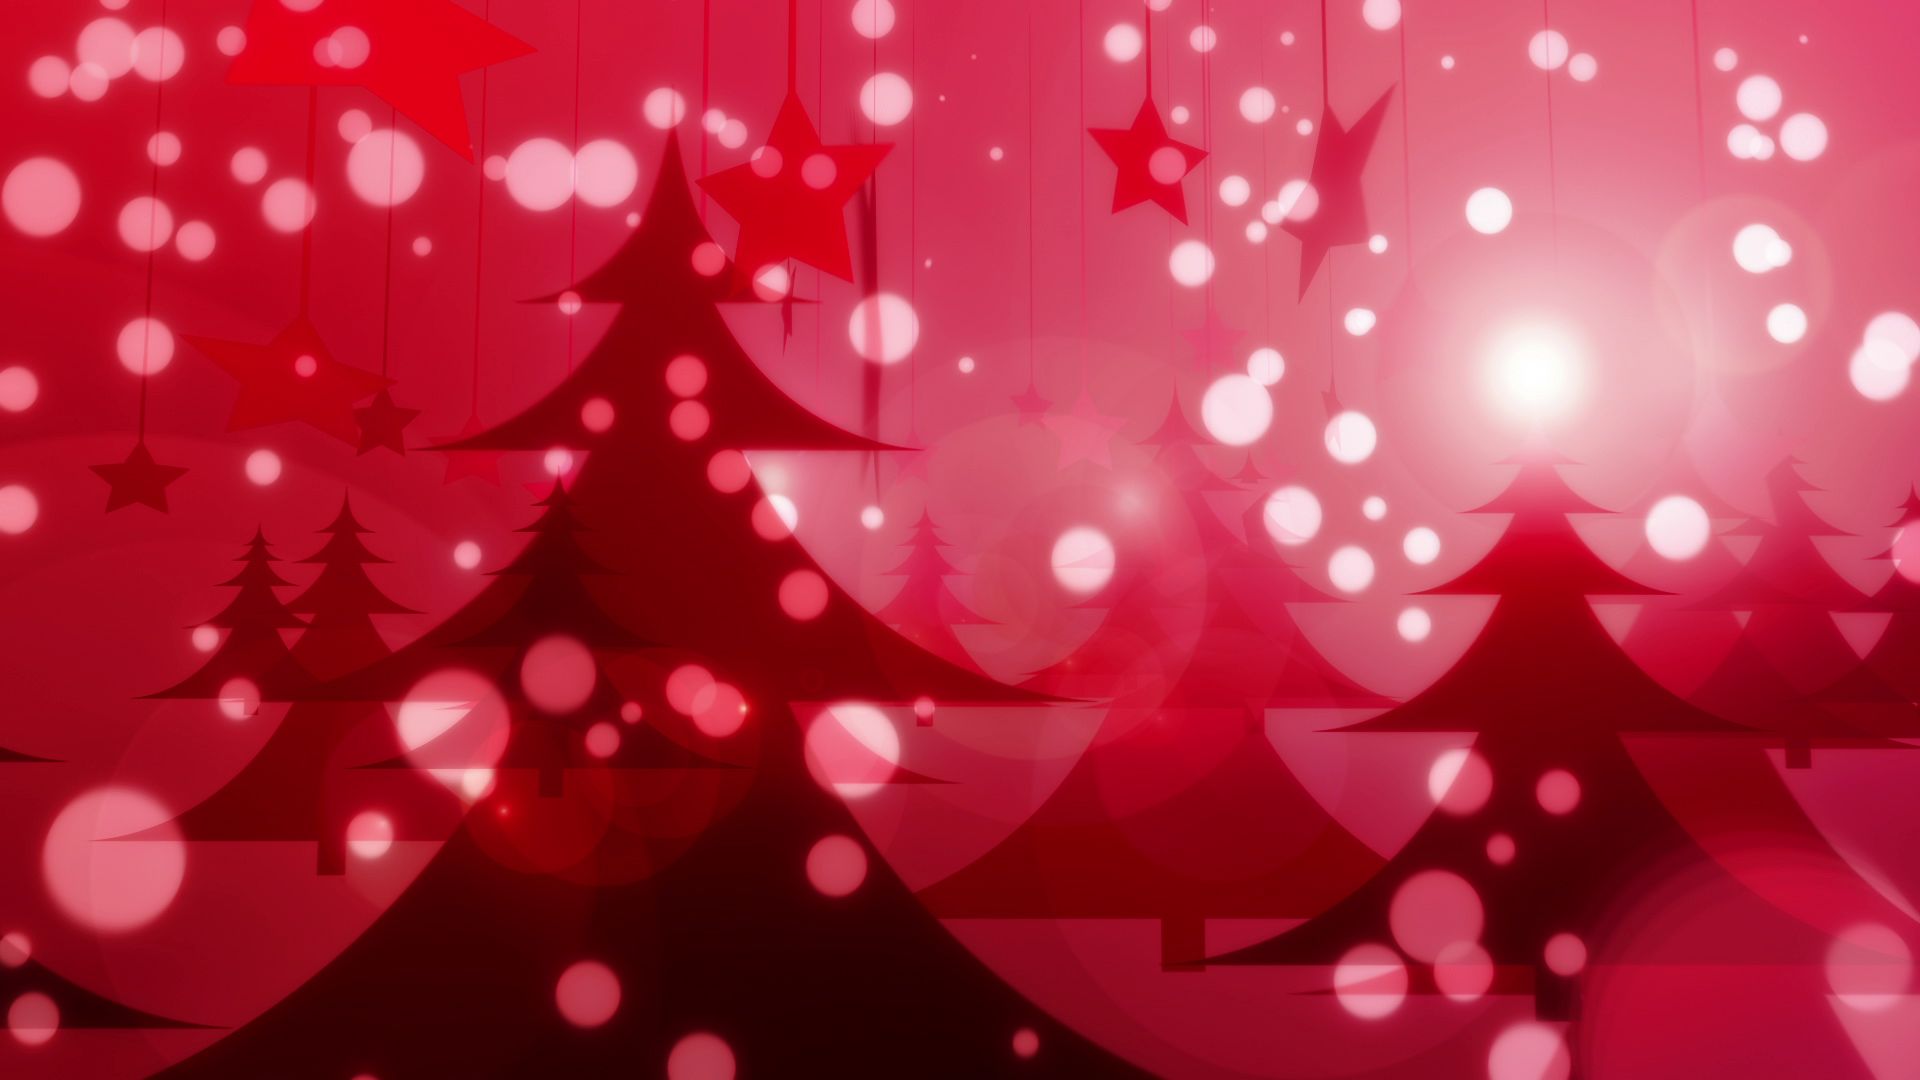 motion backgrounds for christmas